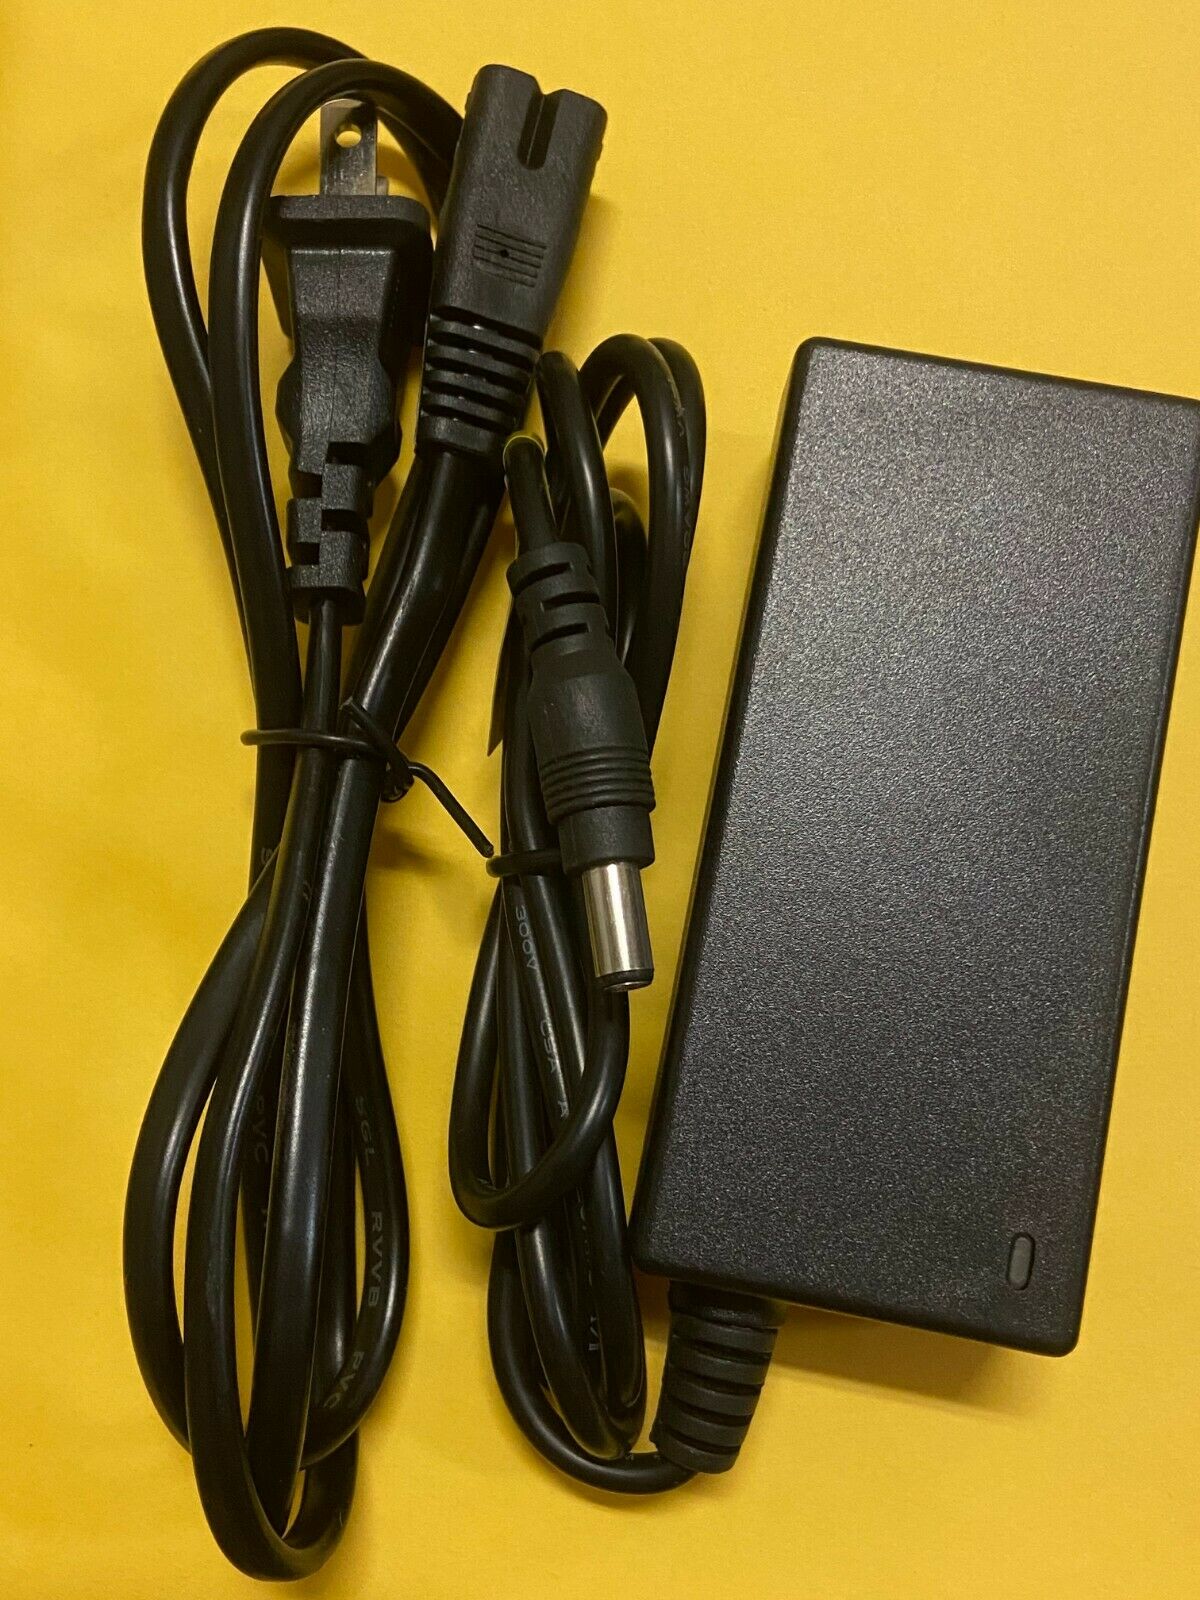 Genuine Power Supply AC Adapter Charger For QNAP TS-269 Pro Color: Black Type: Power supply Maximum Input Current: - Click Image to Close